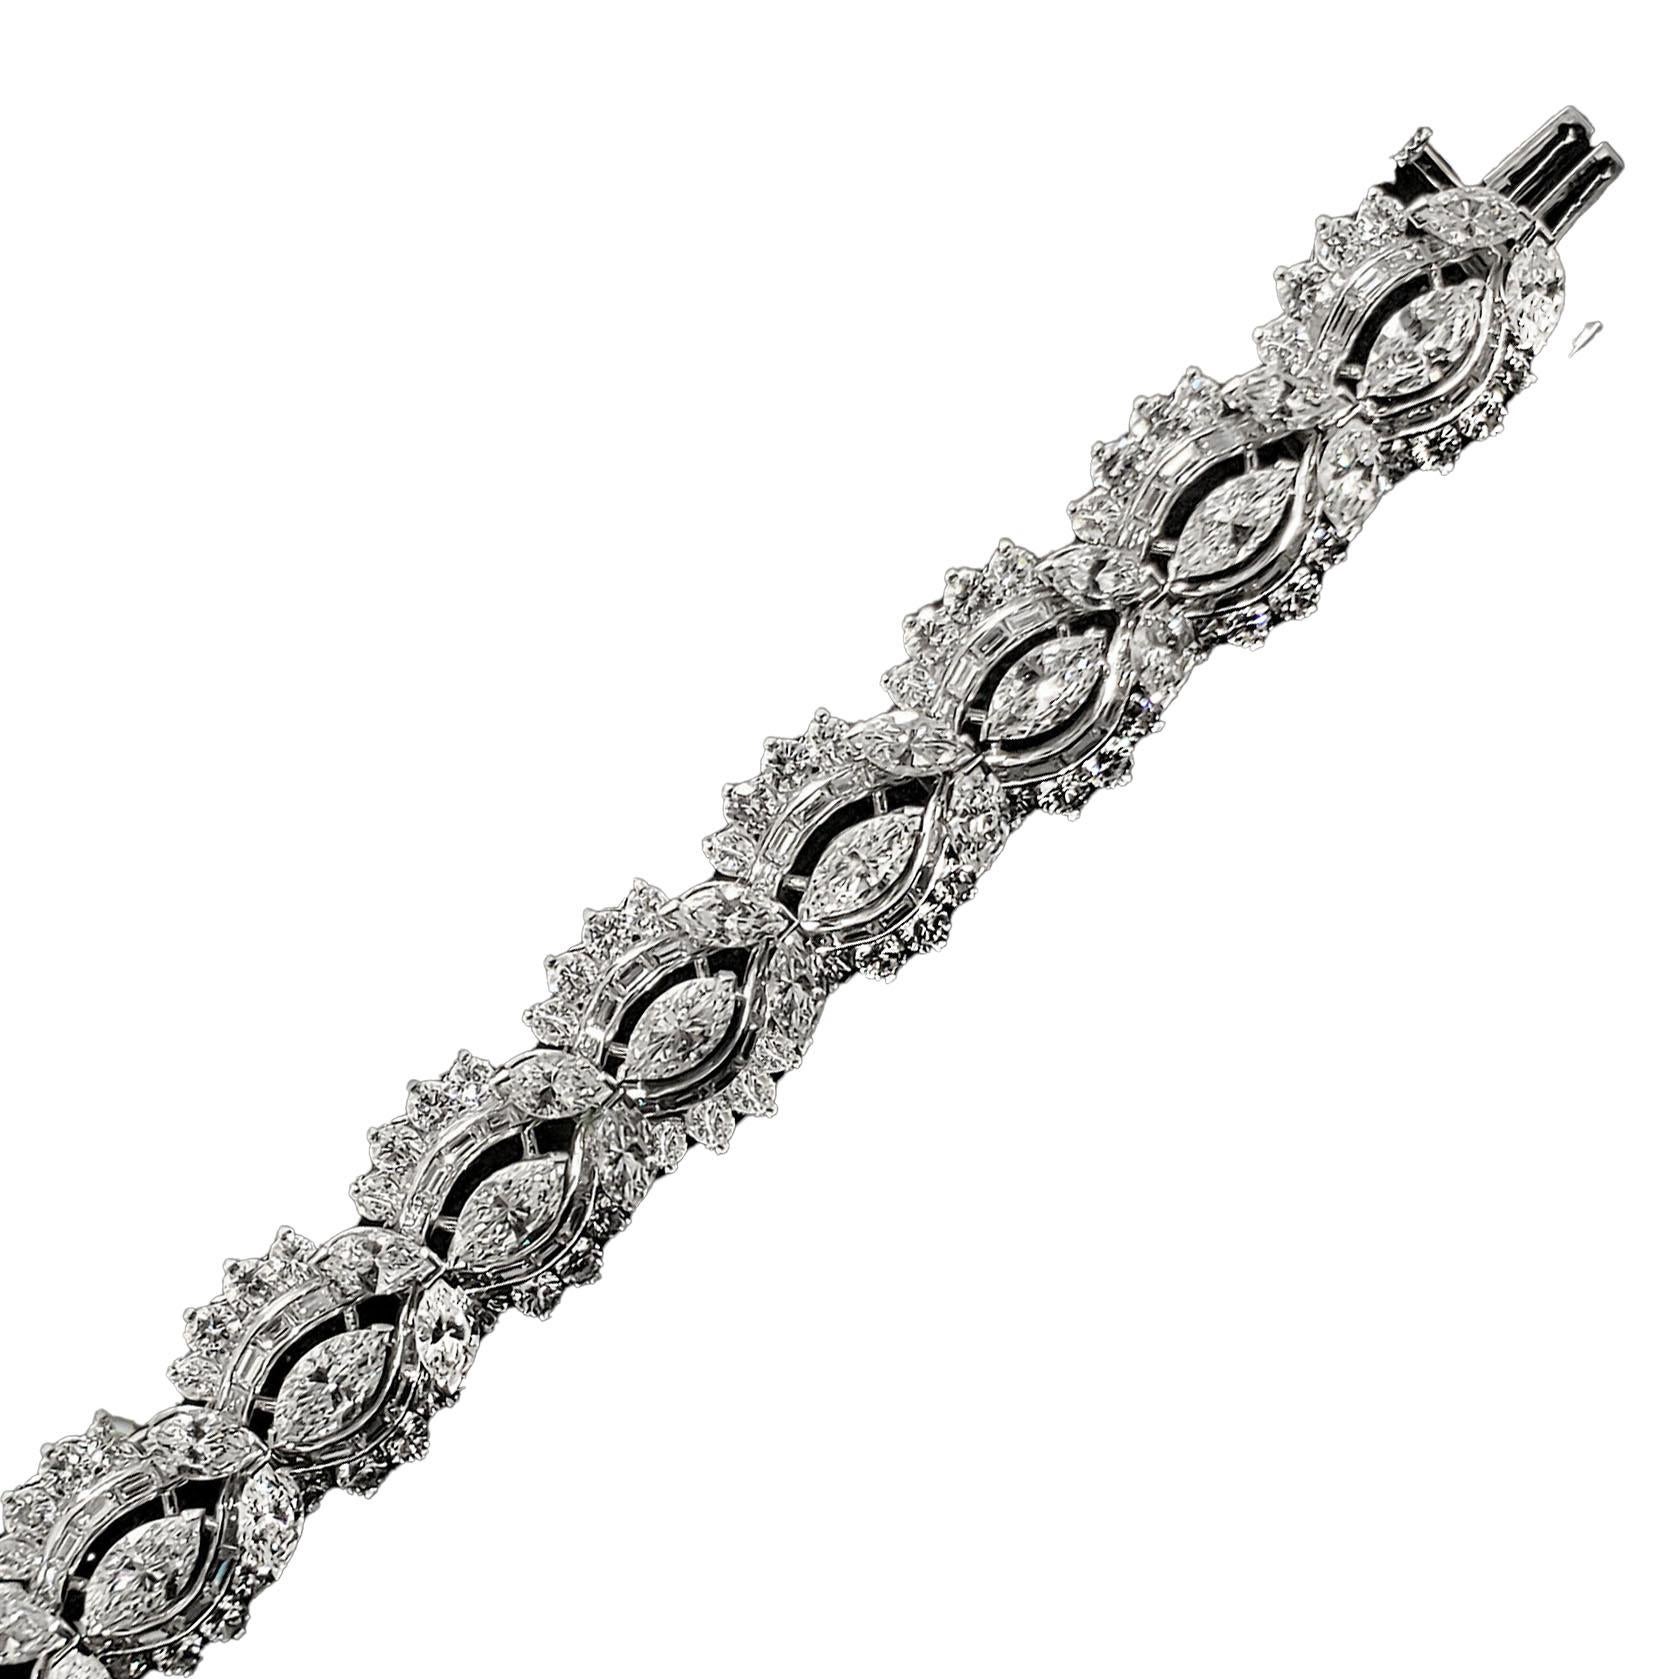 Stunning estate platinum fancy shape diamond tennis bracelet. The bracelet has 273 white diamonds weighing an estimated 22 carats total weight. There are 39 marquise, 130 baguette and 104 round brilliant shape diamonds. The bracelet is in excellent